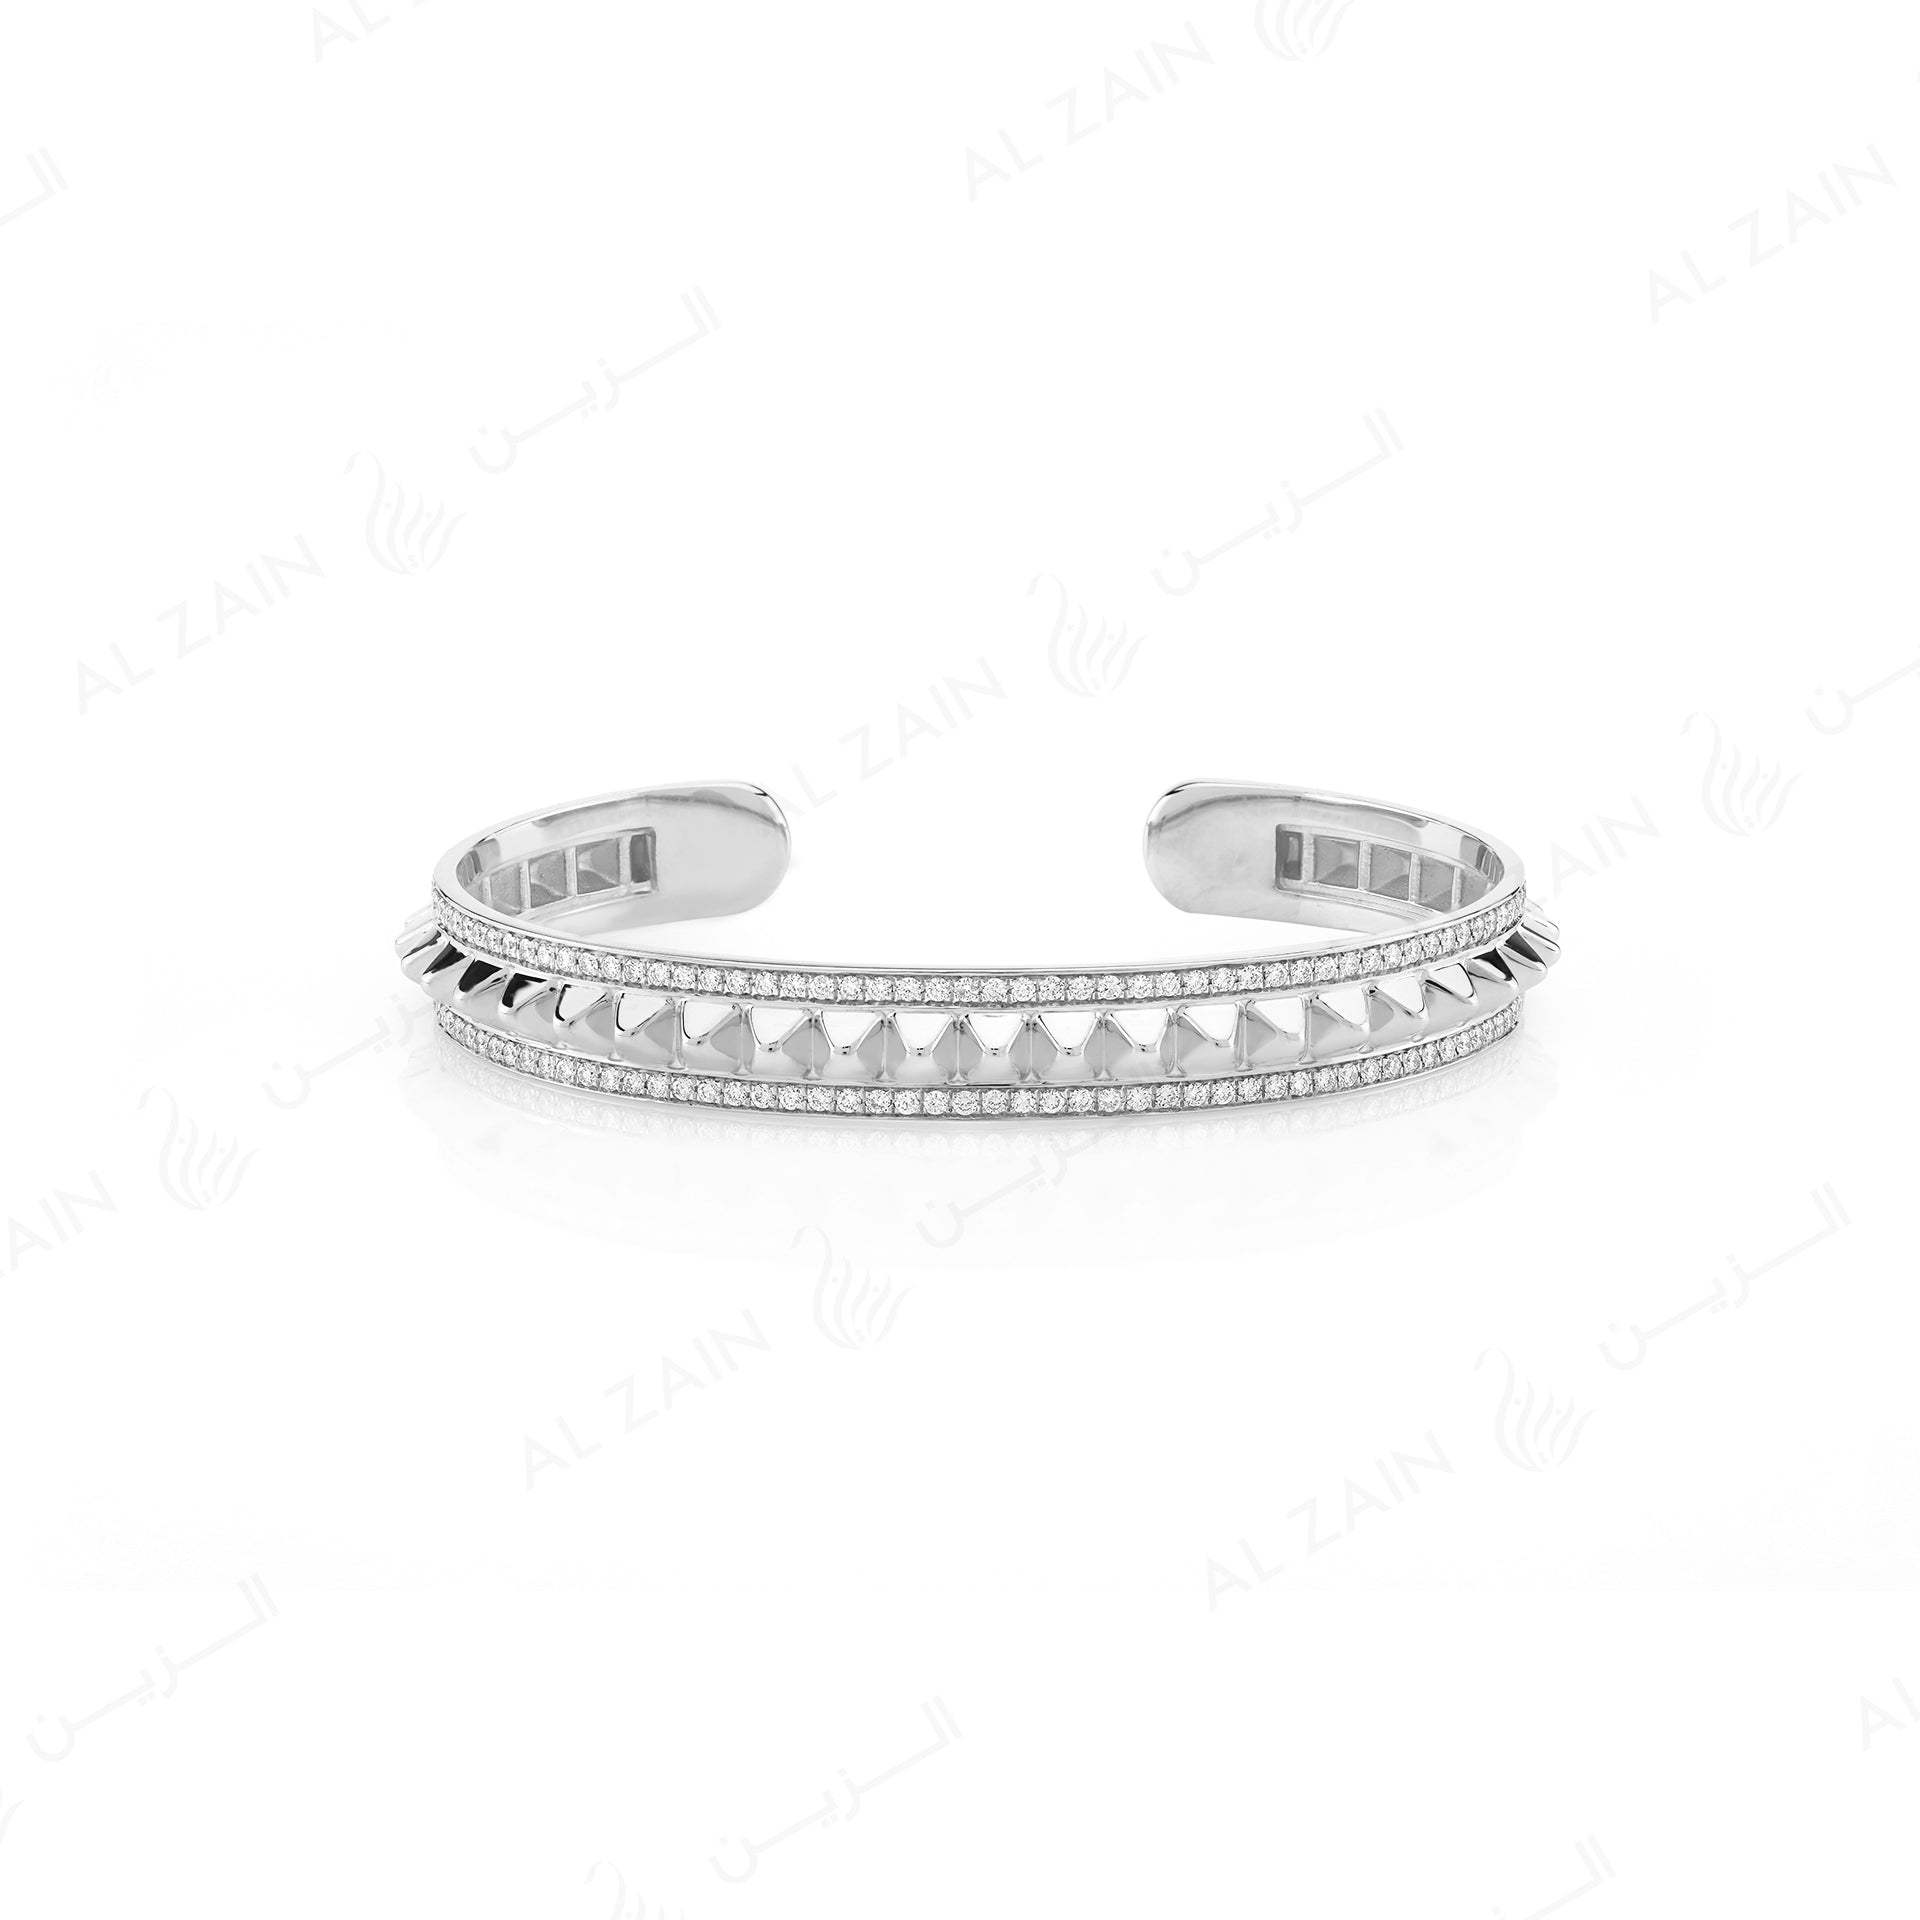 Hab El Hayl 2nd Edition Bangle in White Gold with Diamonds